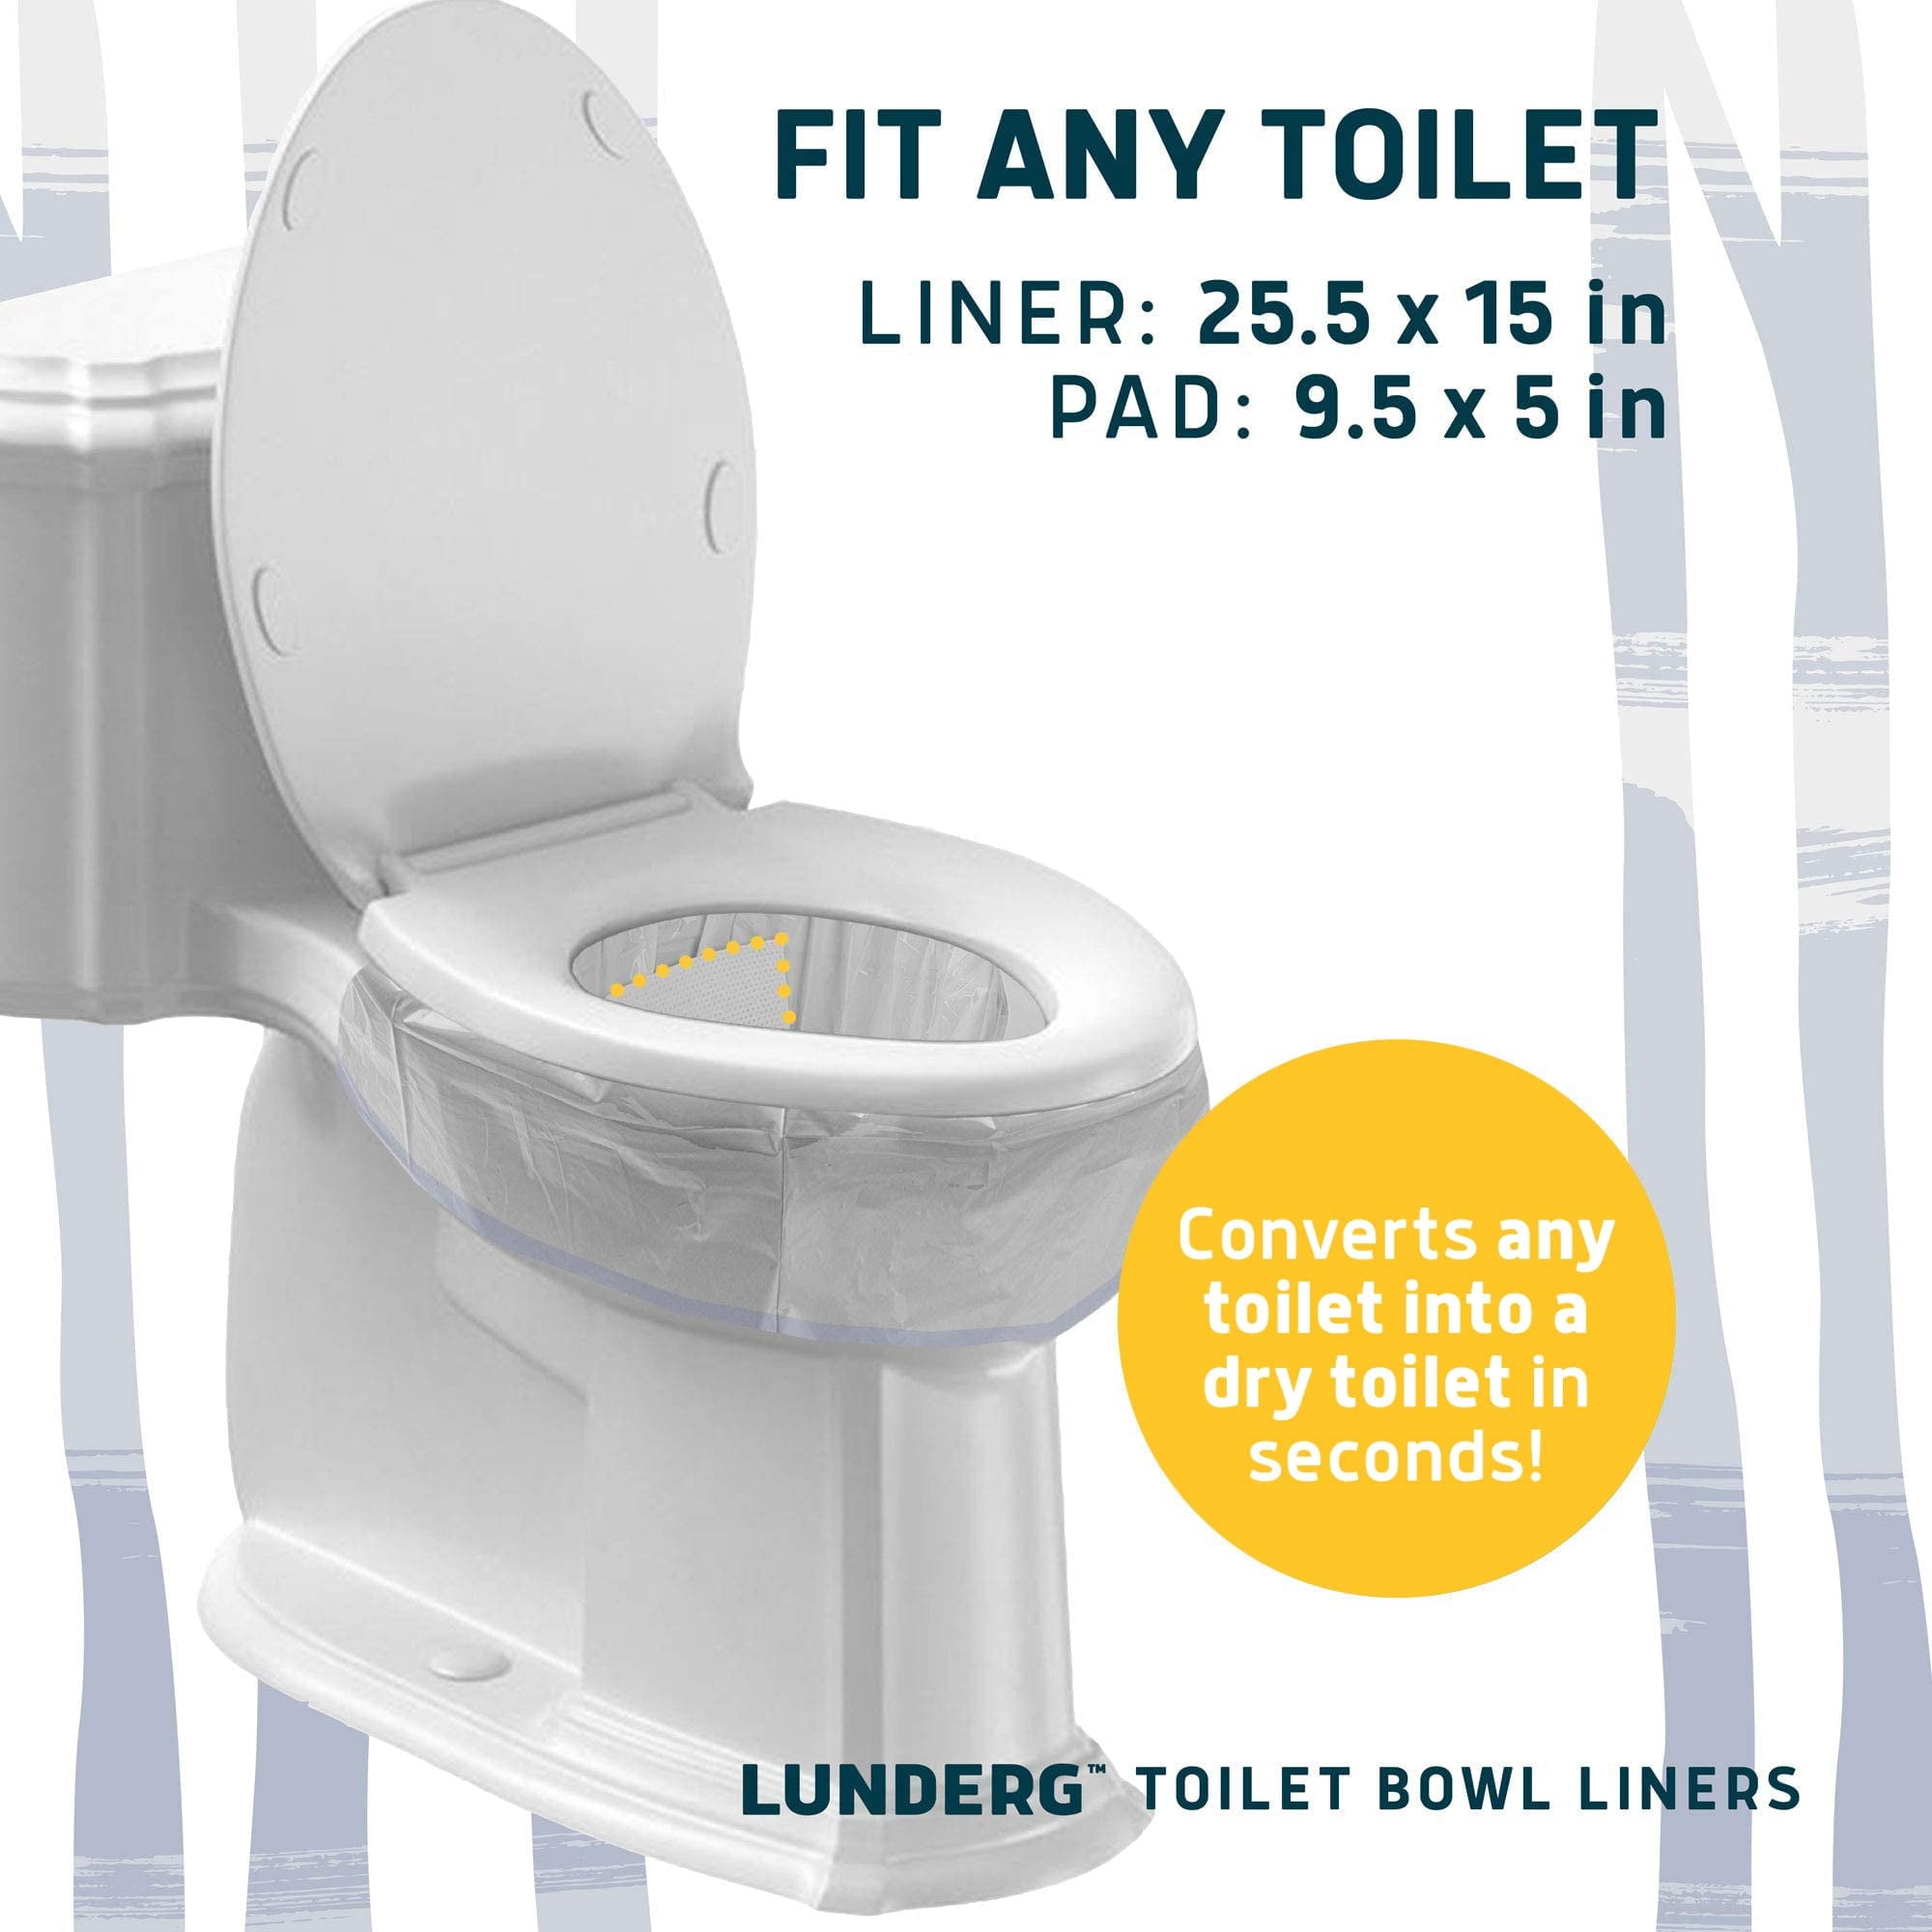 Lunderg Toilet Bowl Liners with Lemon Scented Super Absorbent Pads, 20 ct